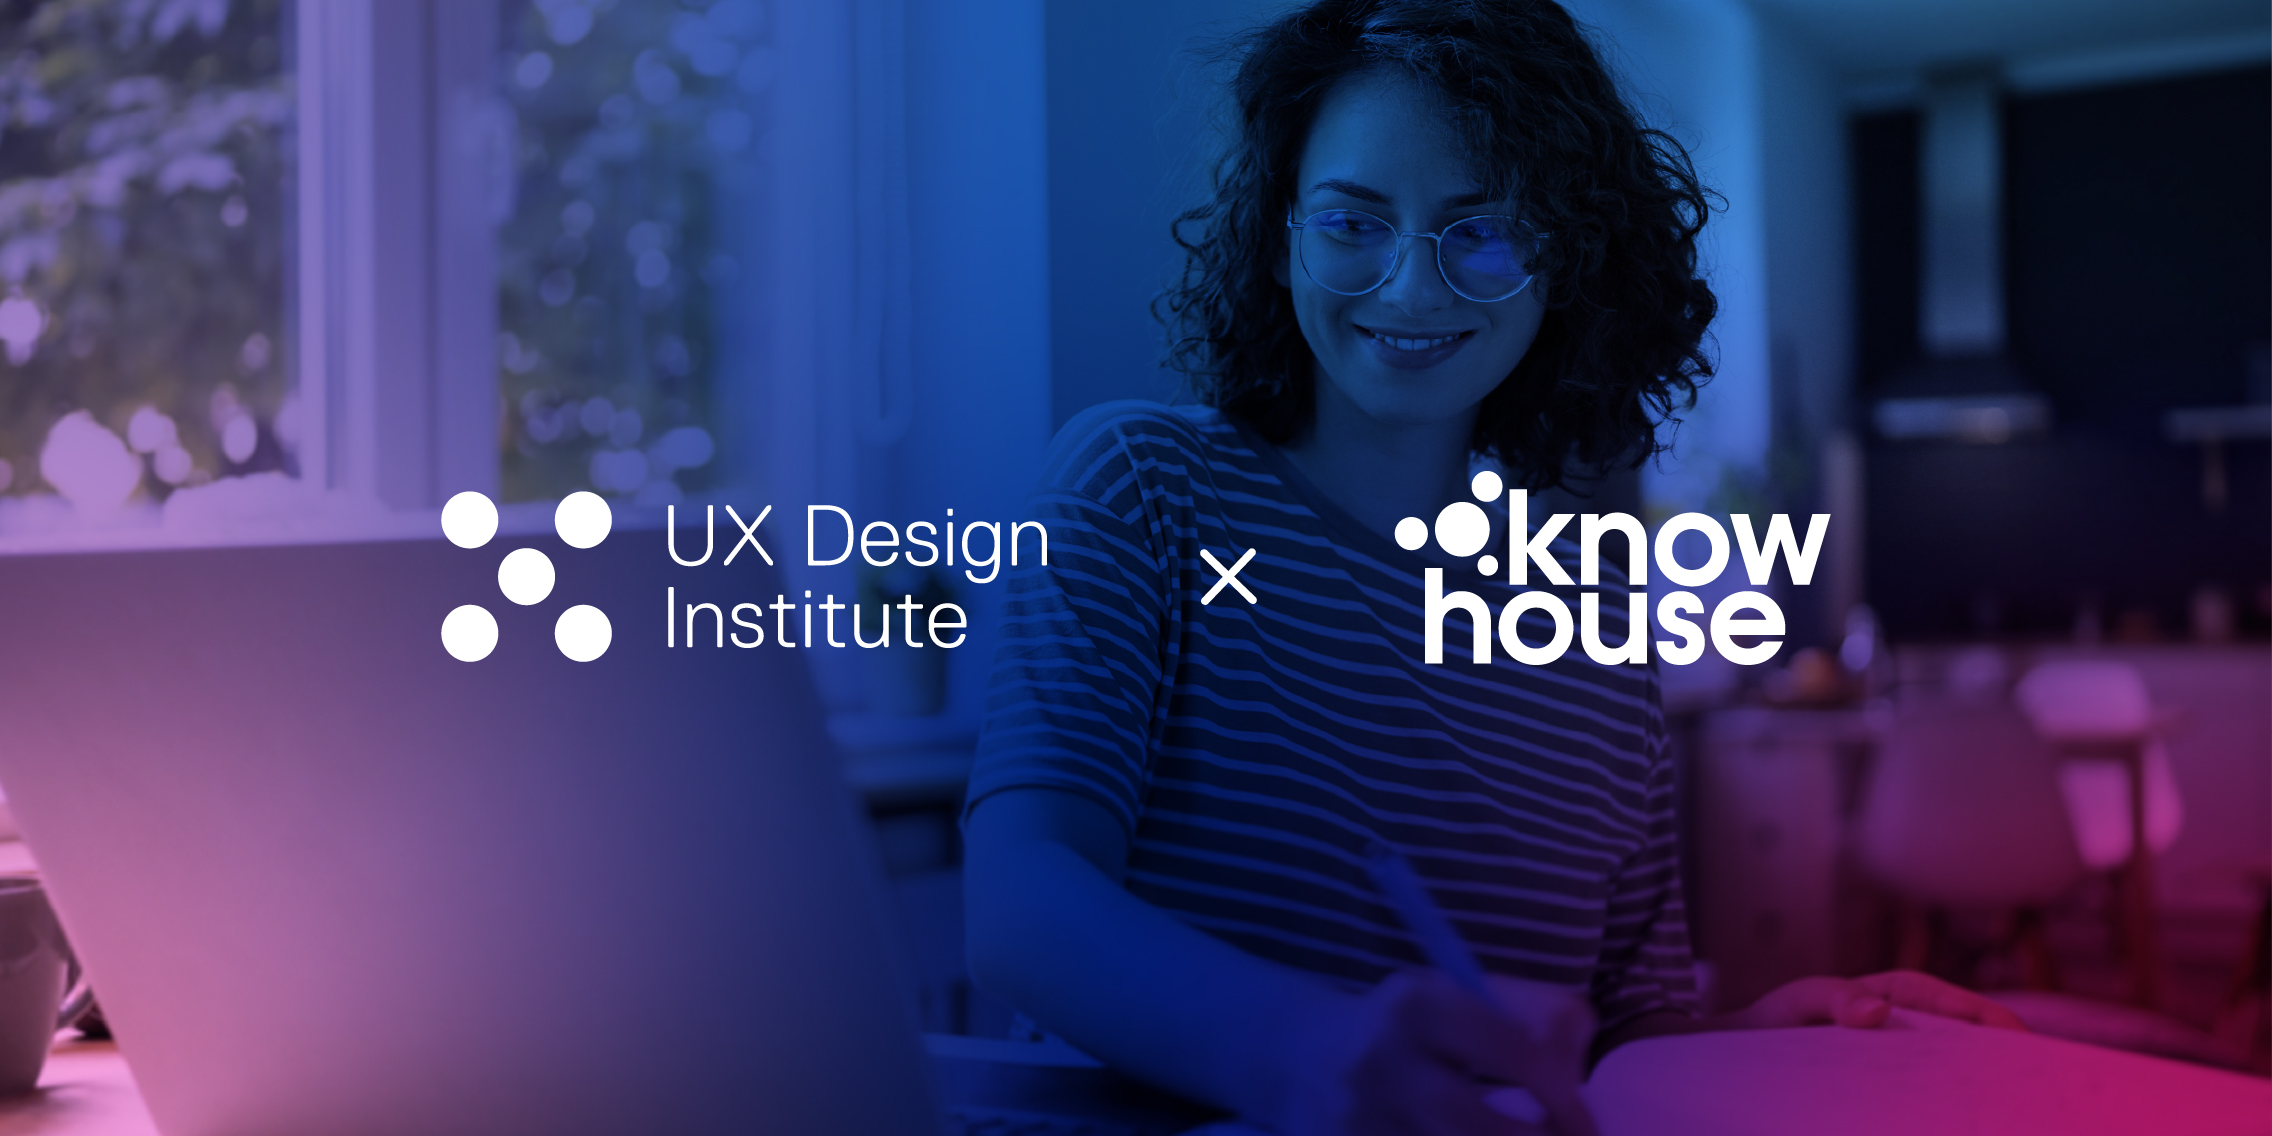 Feature image for the bog showing the logos of UX Design Institute and KnowHouse